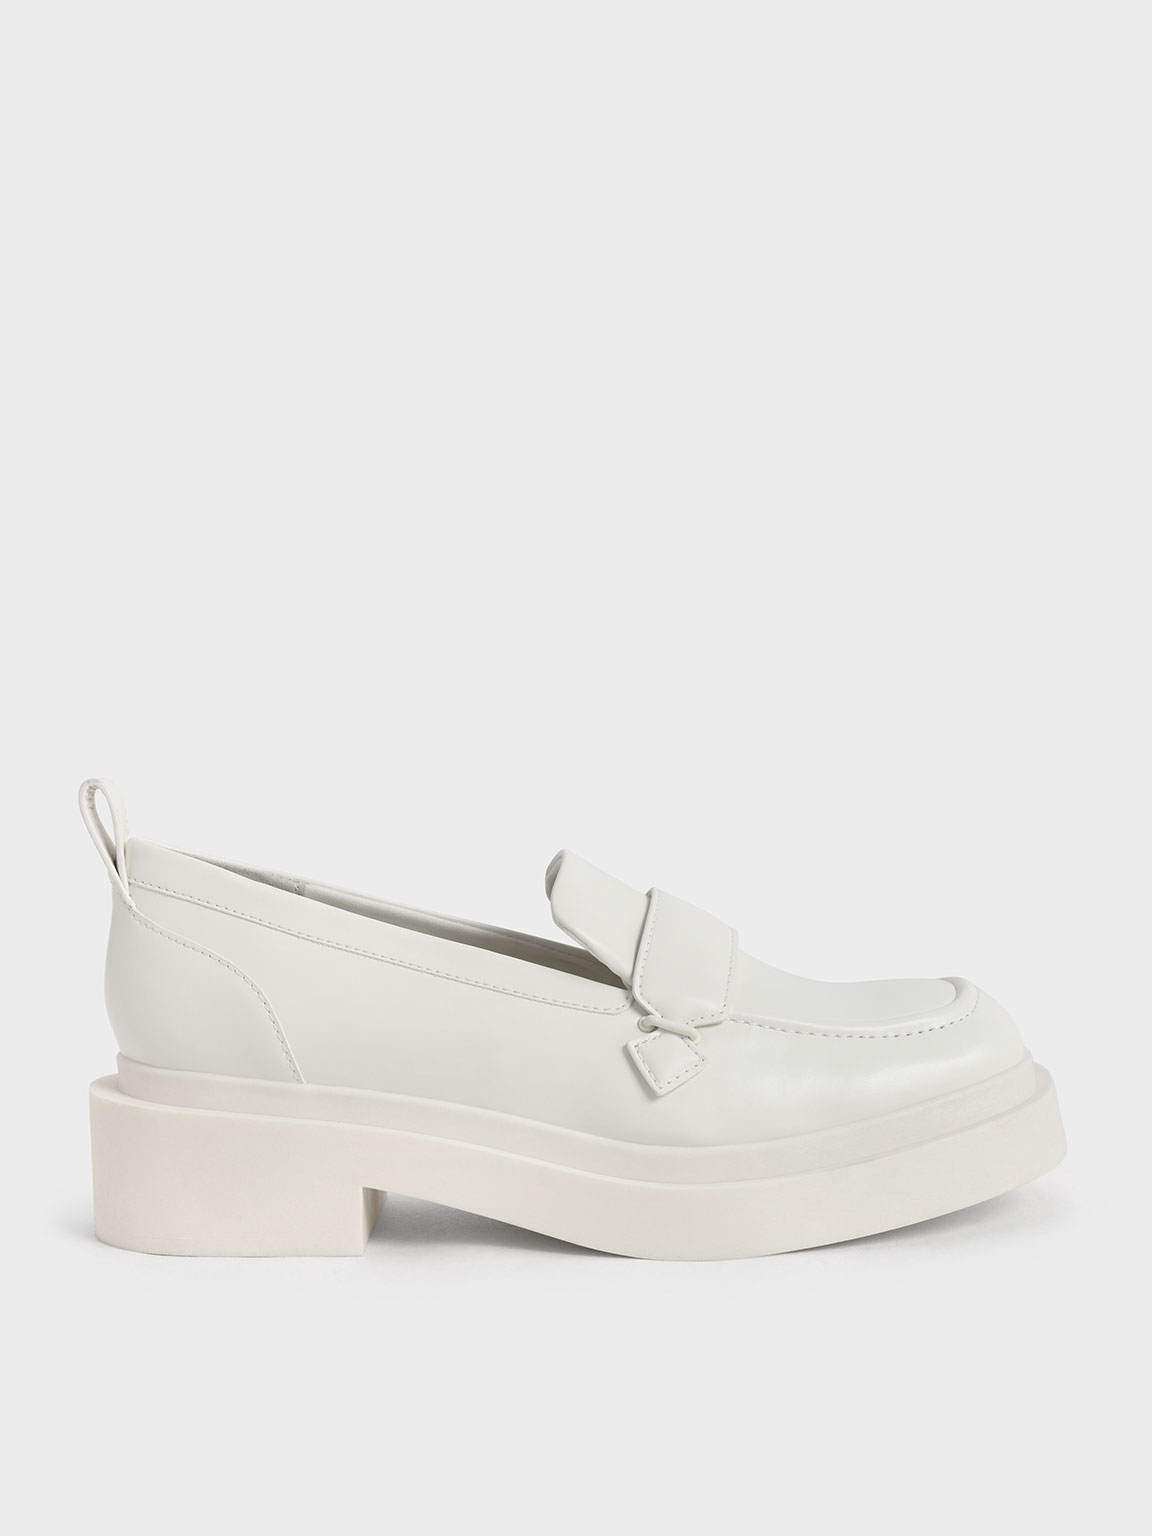 Charles & Keith Platform Penny Loafers In Chalk | ModeSens